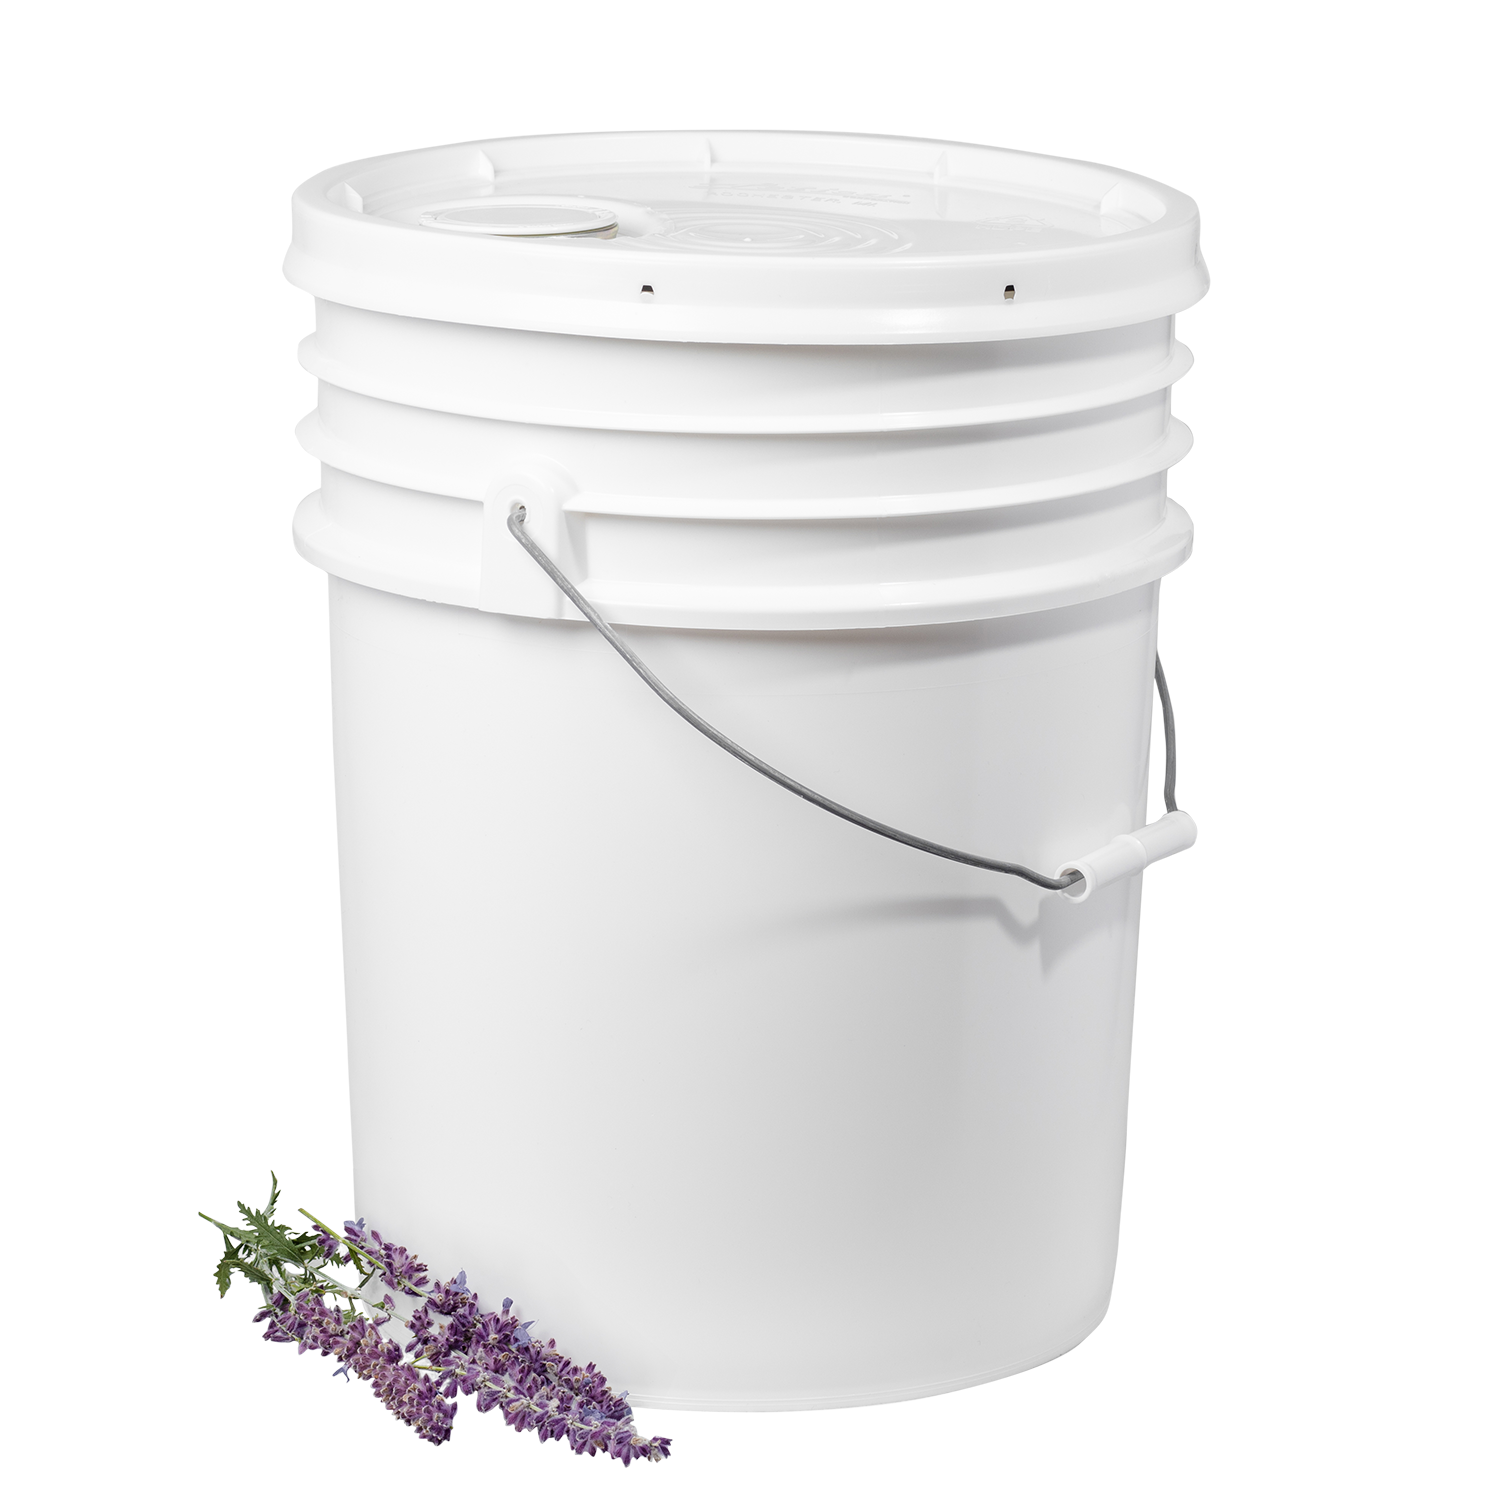 Shea Butter Body Wash - Lavender - 5 Gallons